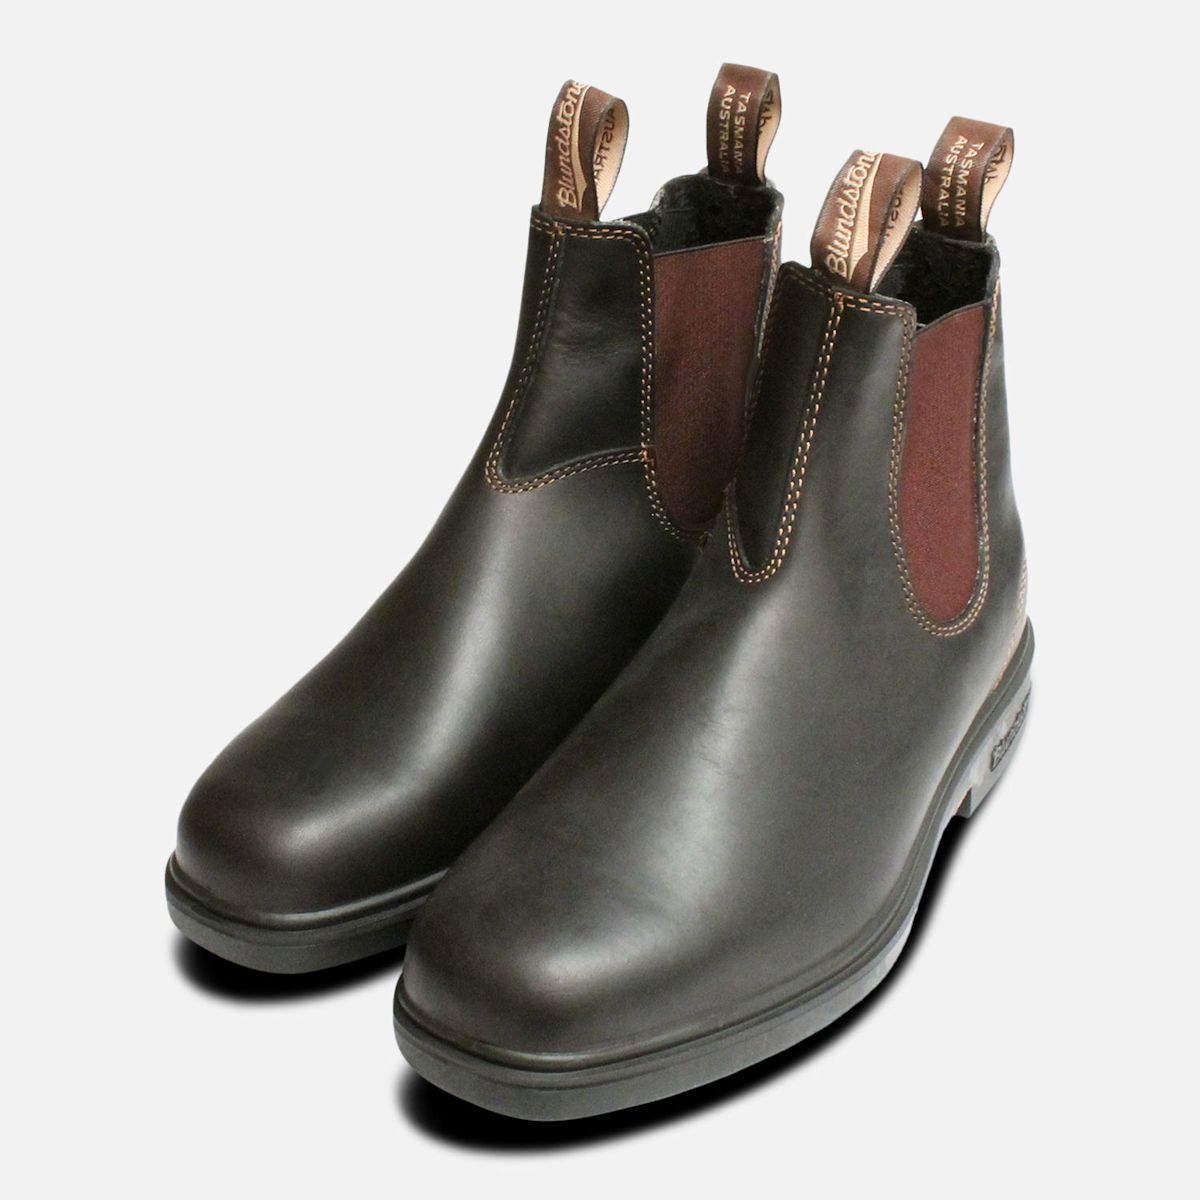 Blundstone 062 Stout Brown Unisex Leather Square-toe Ankle Slip-on Chelsea Boots